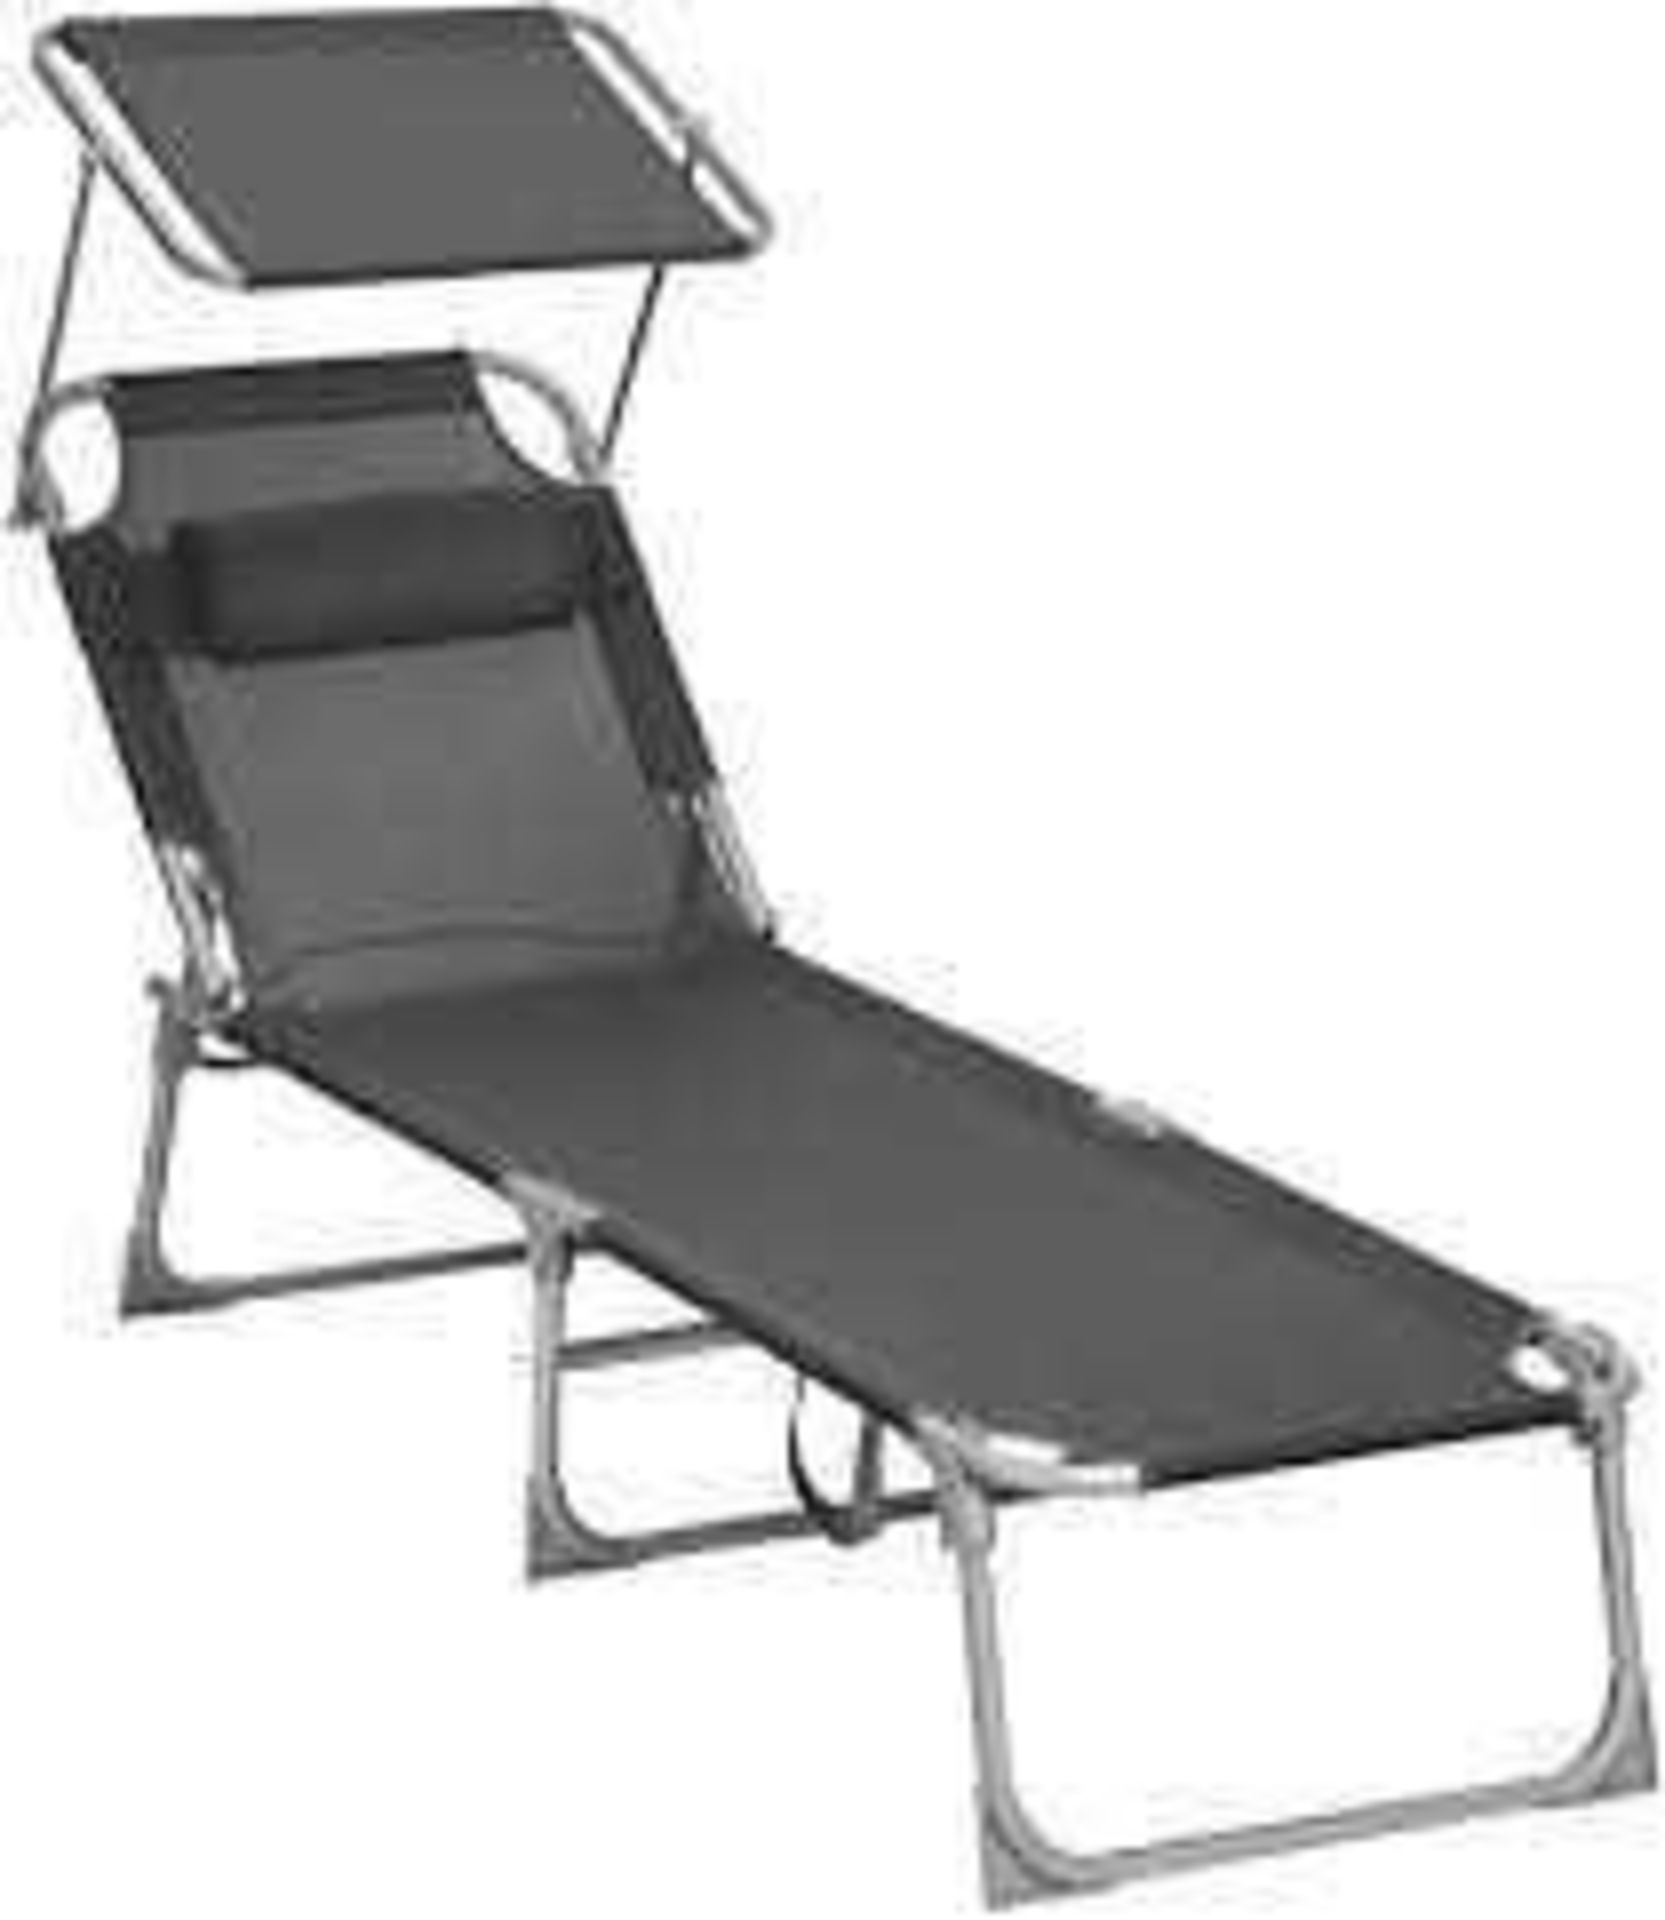 RRP £60 Boxed Songmics Sun Lounger (Appraisals Available On Request) (Pictures For Illustration